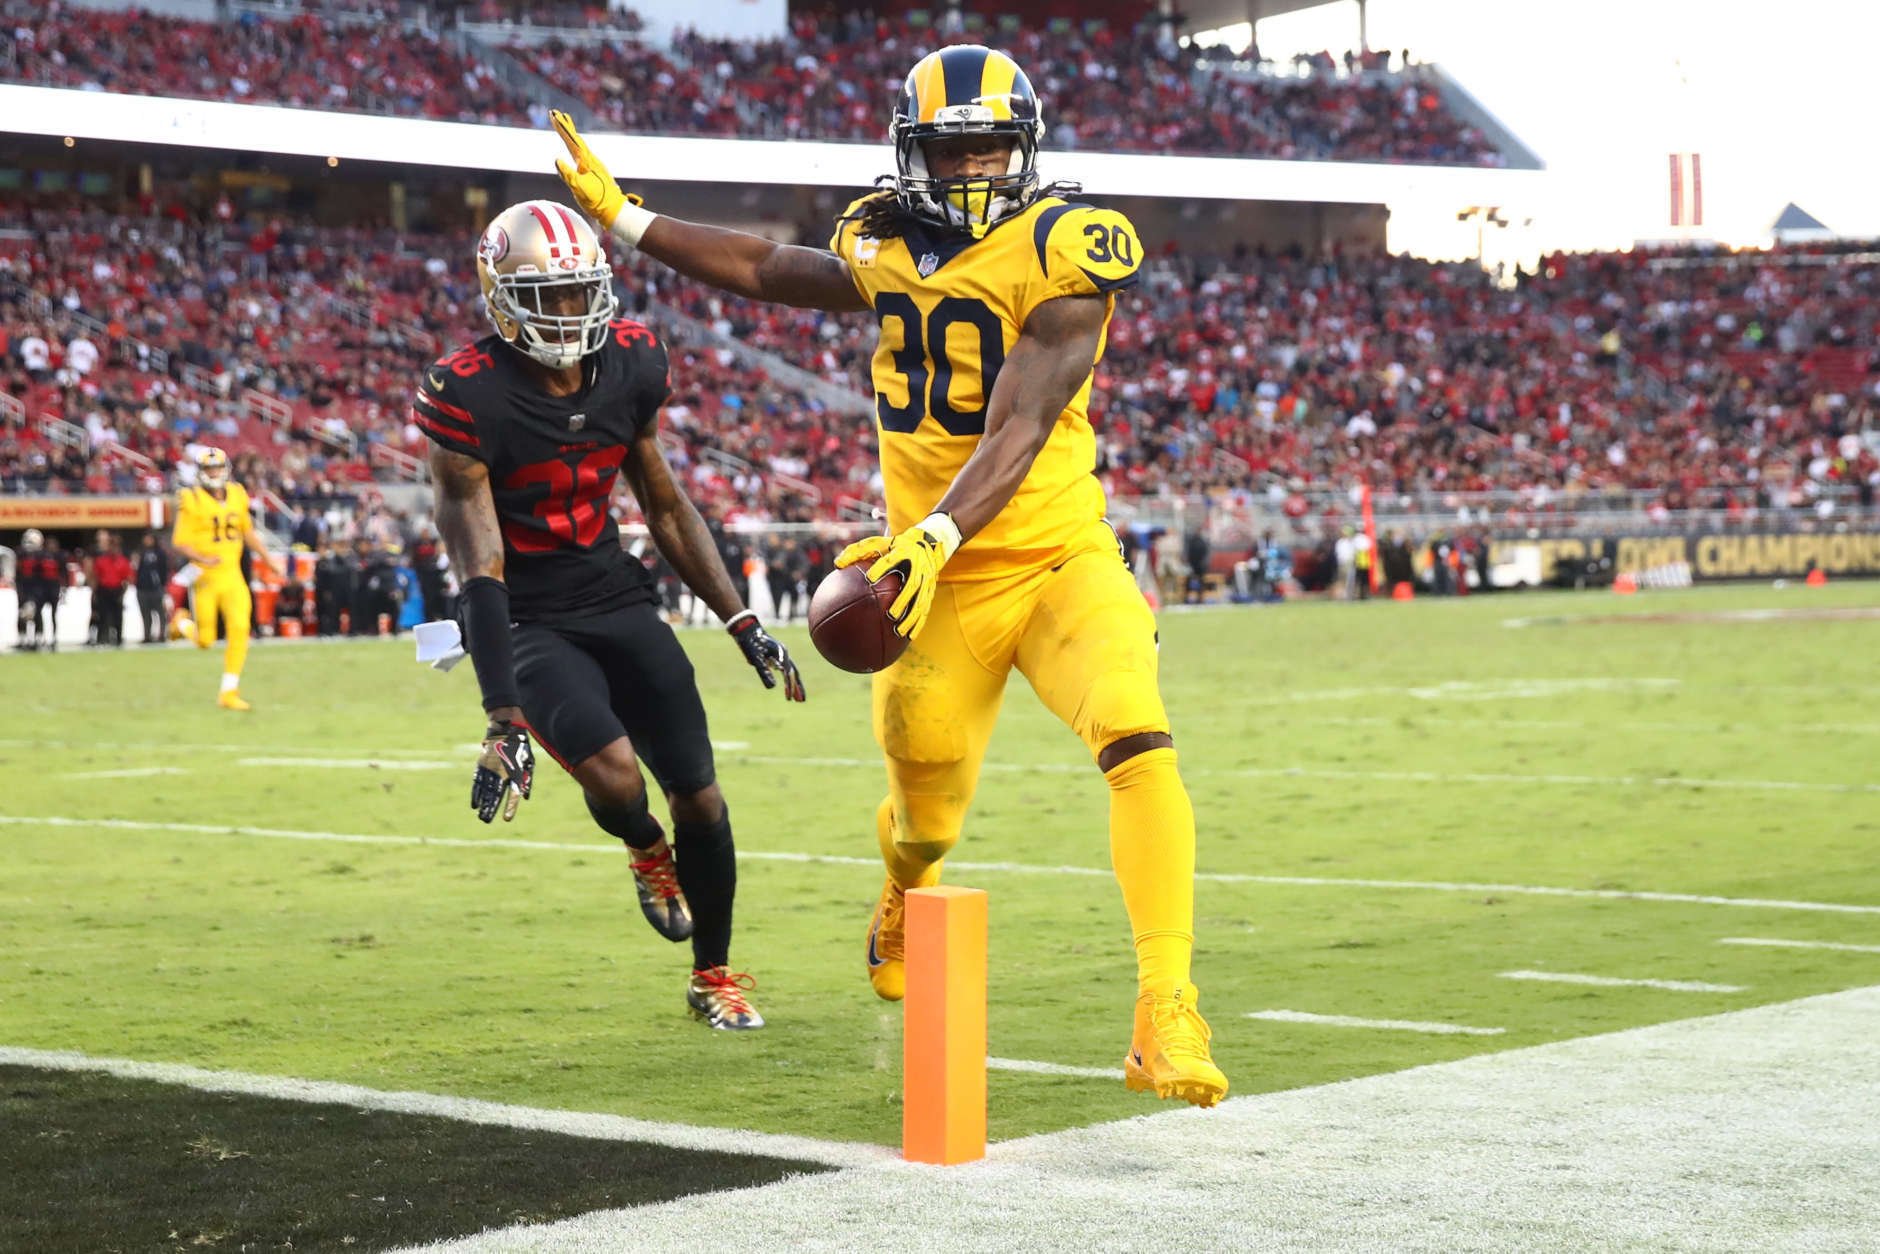 SANTA CLARA, CA - SEPTEMBER 21:  Todd Gurley #30 of the Los Angeles Rams rushes for a touchdown against the San Francisco 49ers during their NFL game at Levi's Stadium on September 21, 2017 in Santa Clara, California.  (Photo by Ezra Shaw/Getty Images)